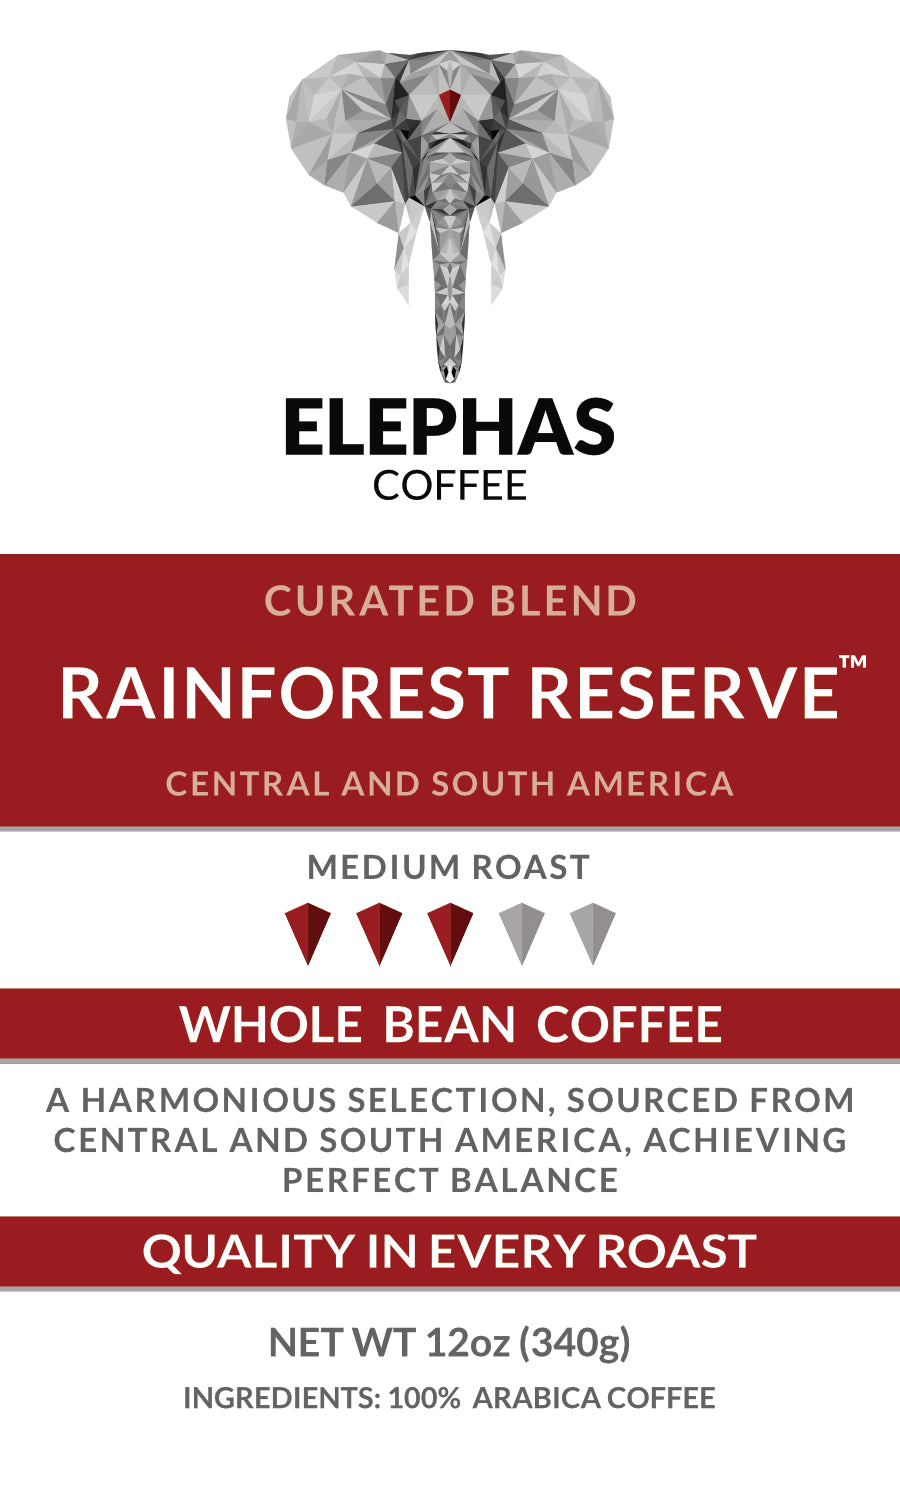 Rainforest Reserve - Curated Coffee Blend From Elephas Coffee